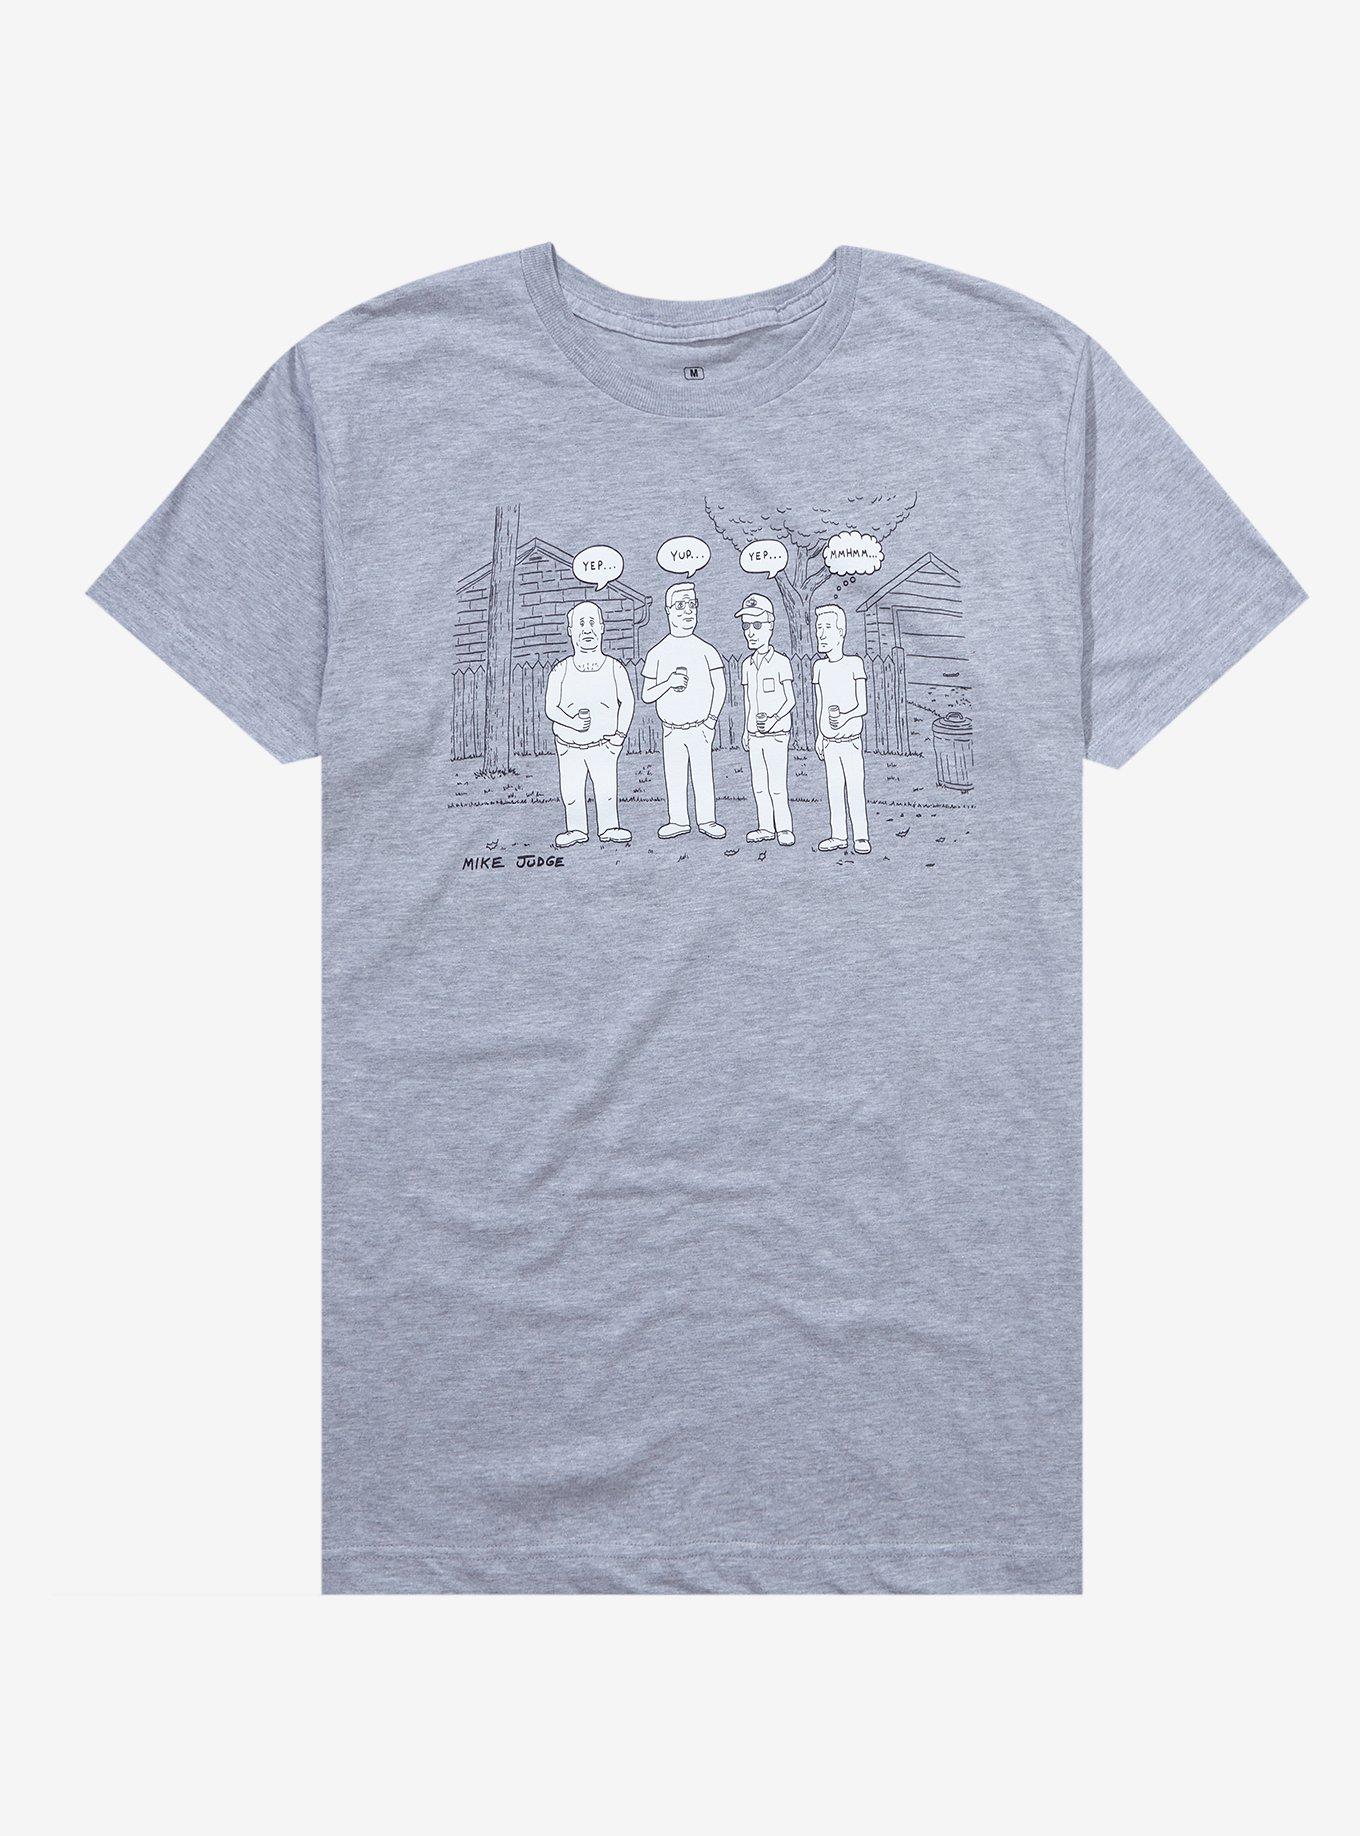 King of The Hill Group Portrait T-Shirt - BoxLunch Exclusive | BoxLunch